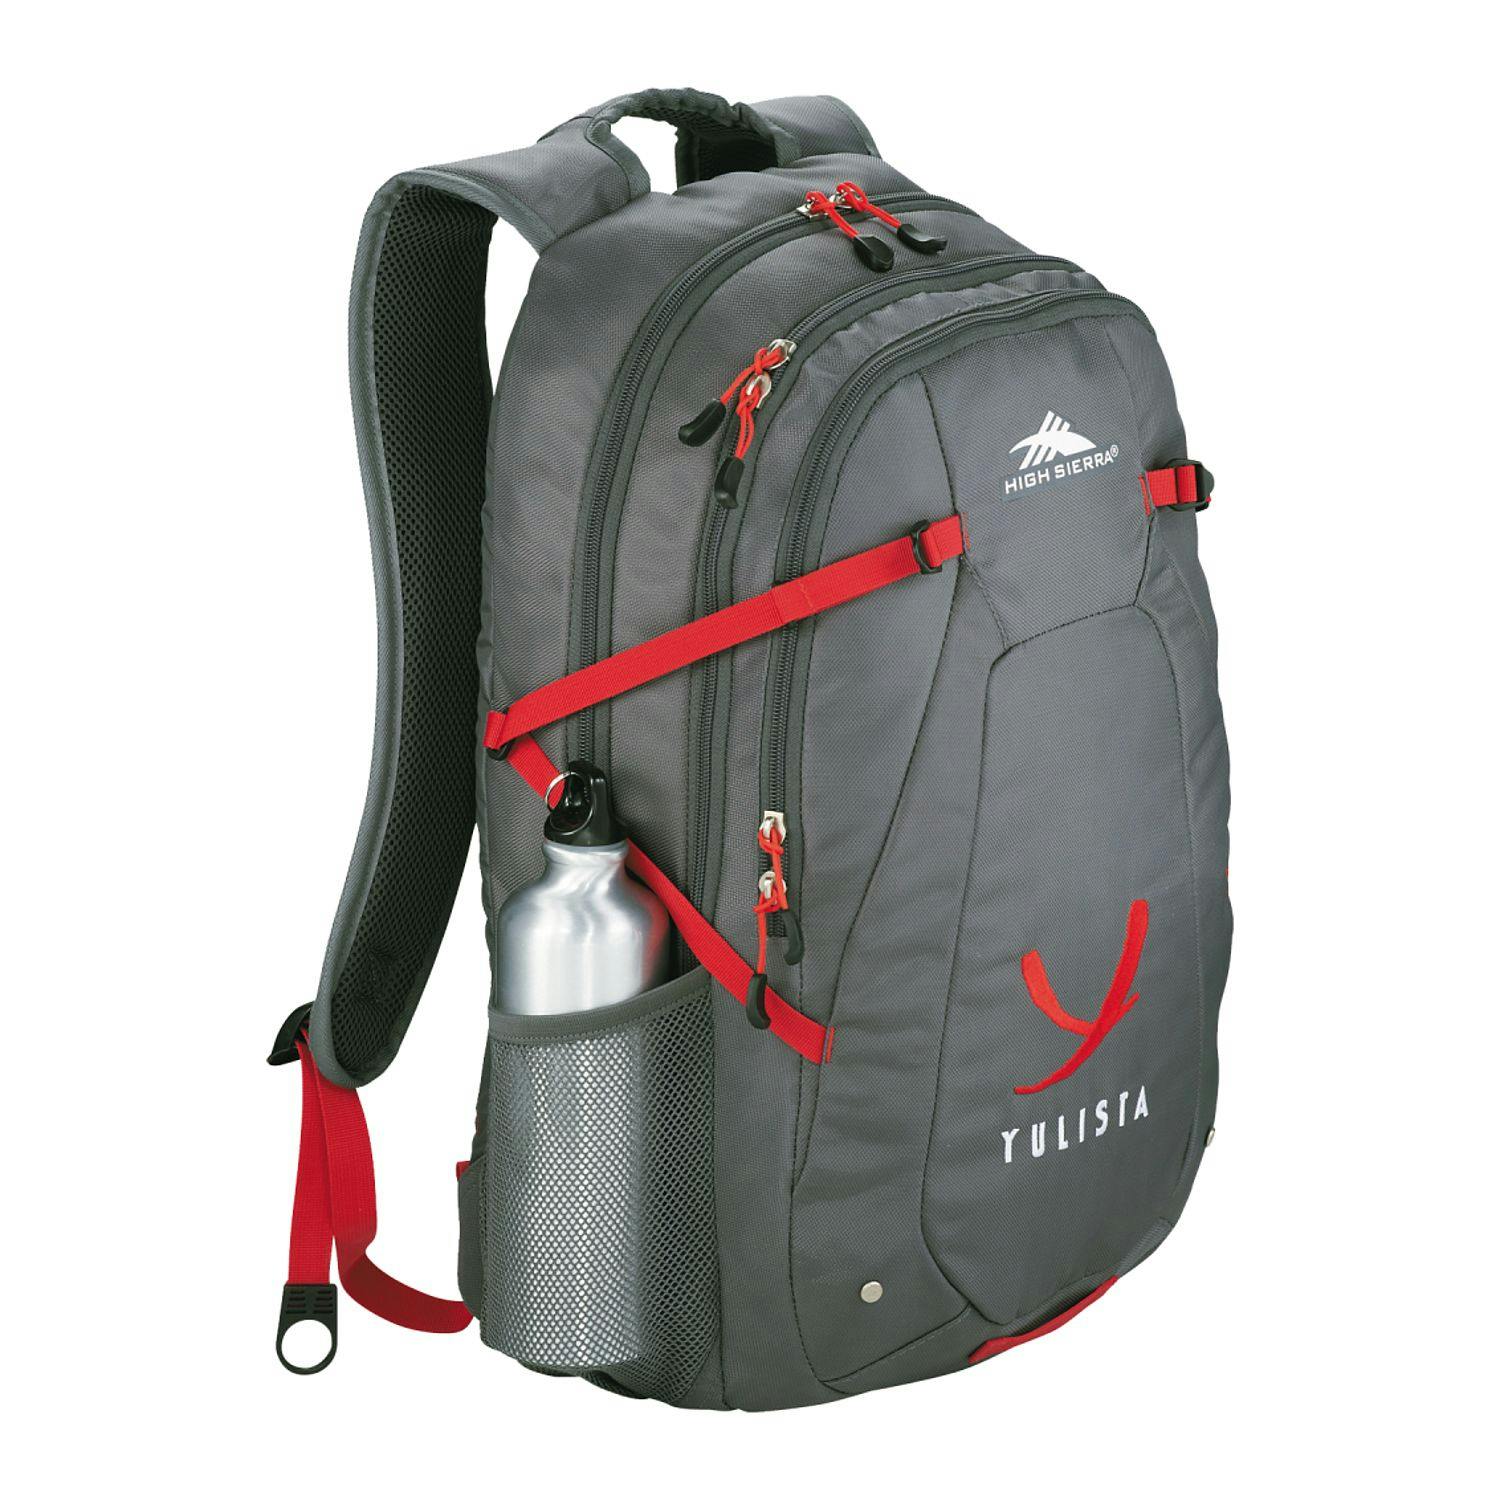 High Sierra Fallout 17" Computer Backpack - additional Image 1